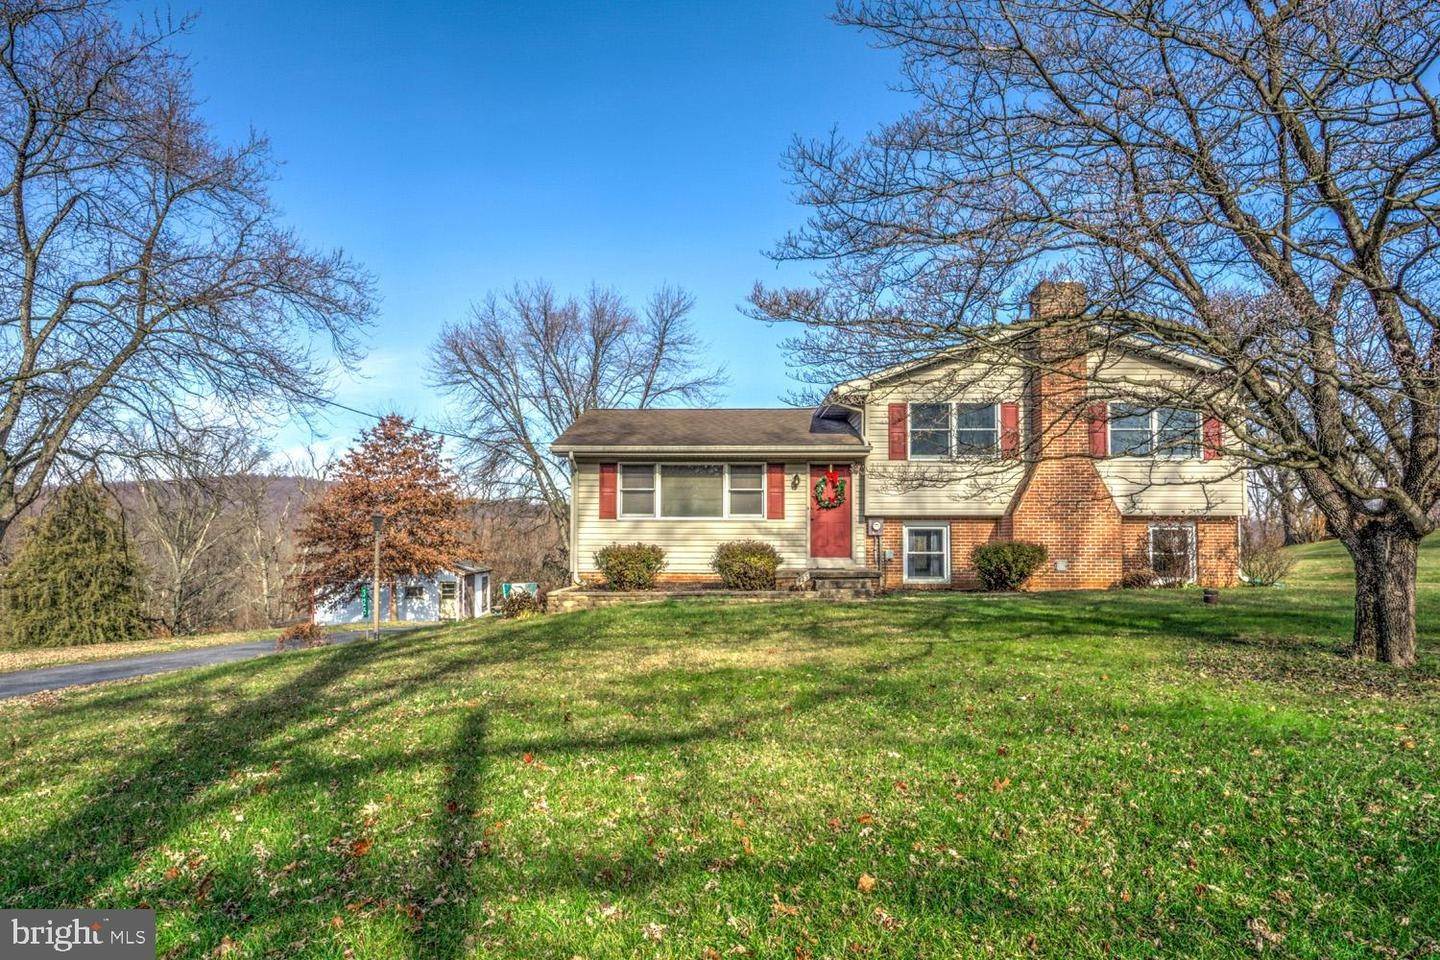 2. Residential for Sale at 325 YUMMERDALL Road Lititz, Pennsylvania 17543 United States